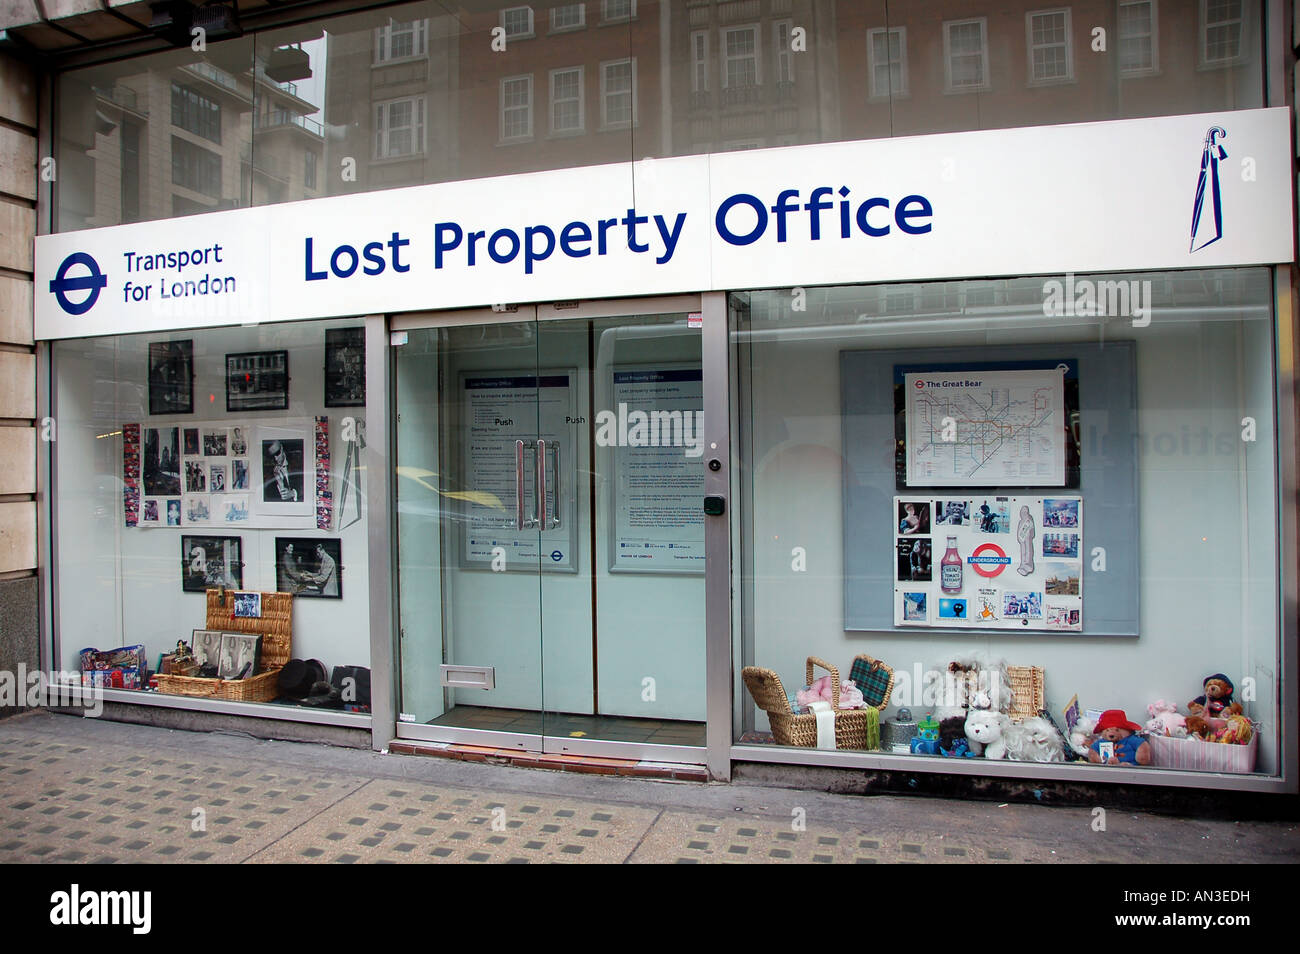 Is this the lost property office